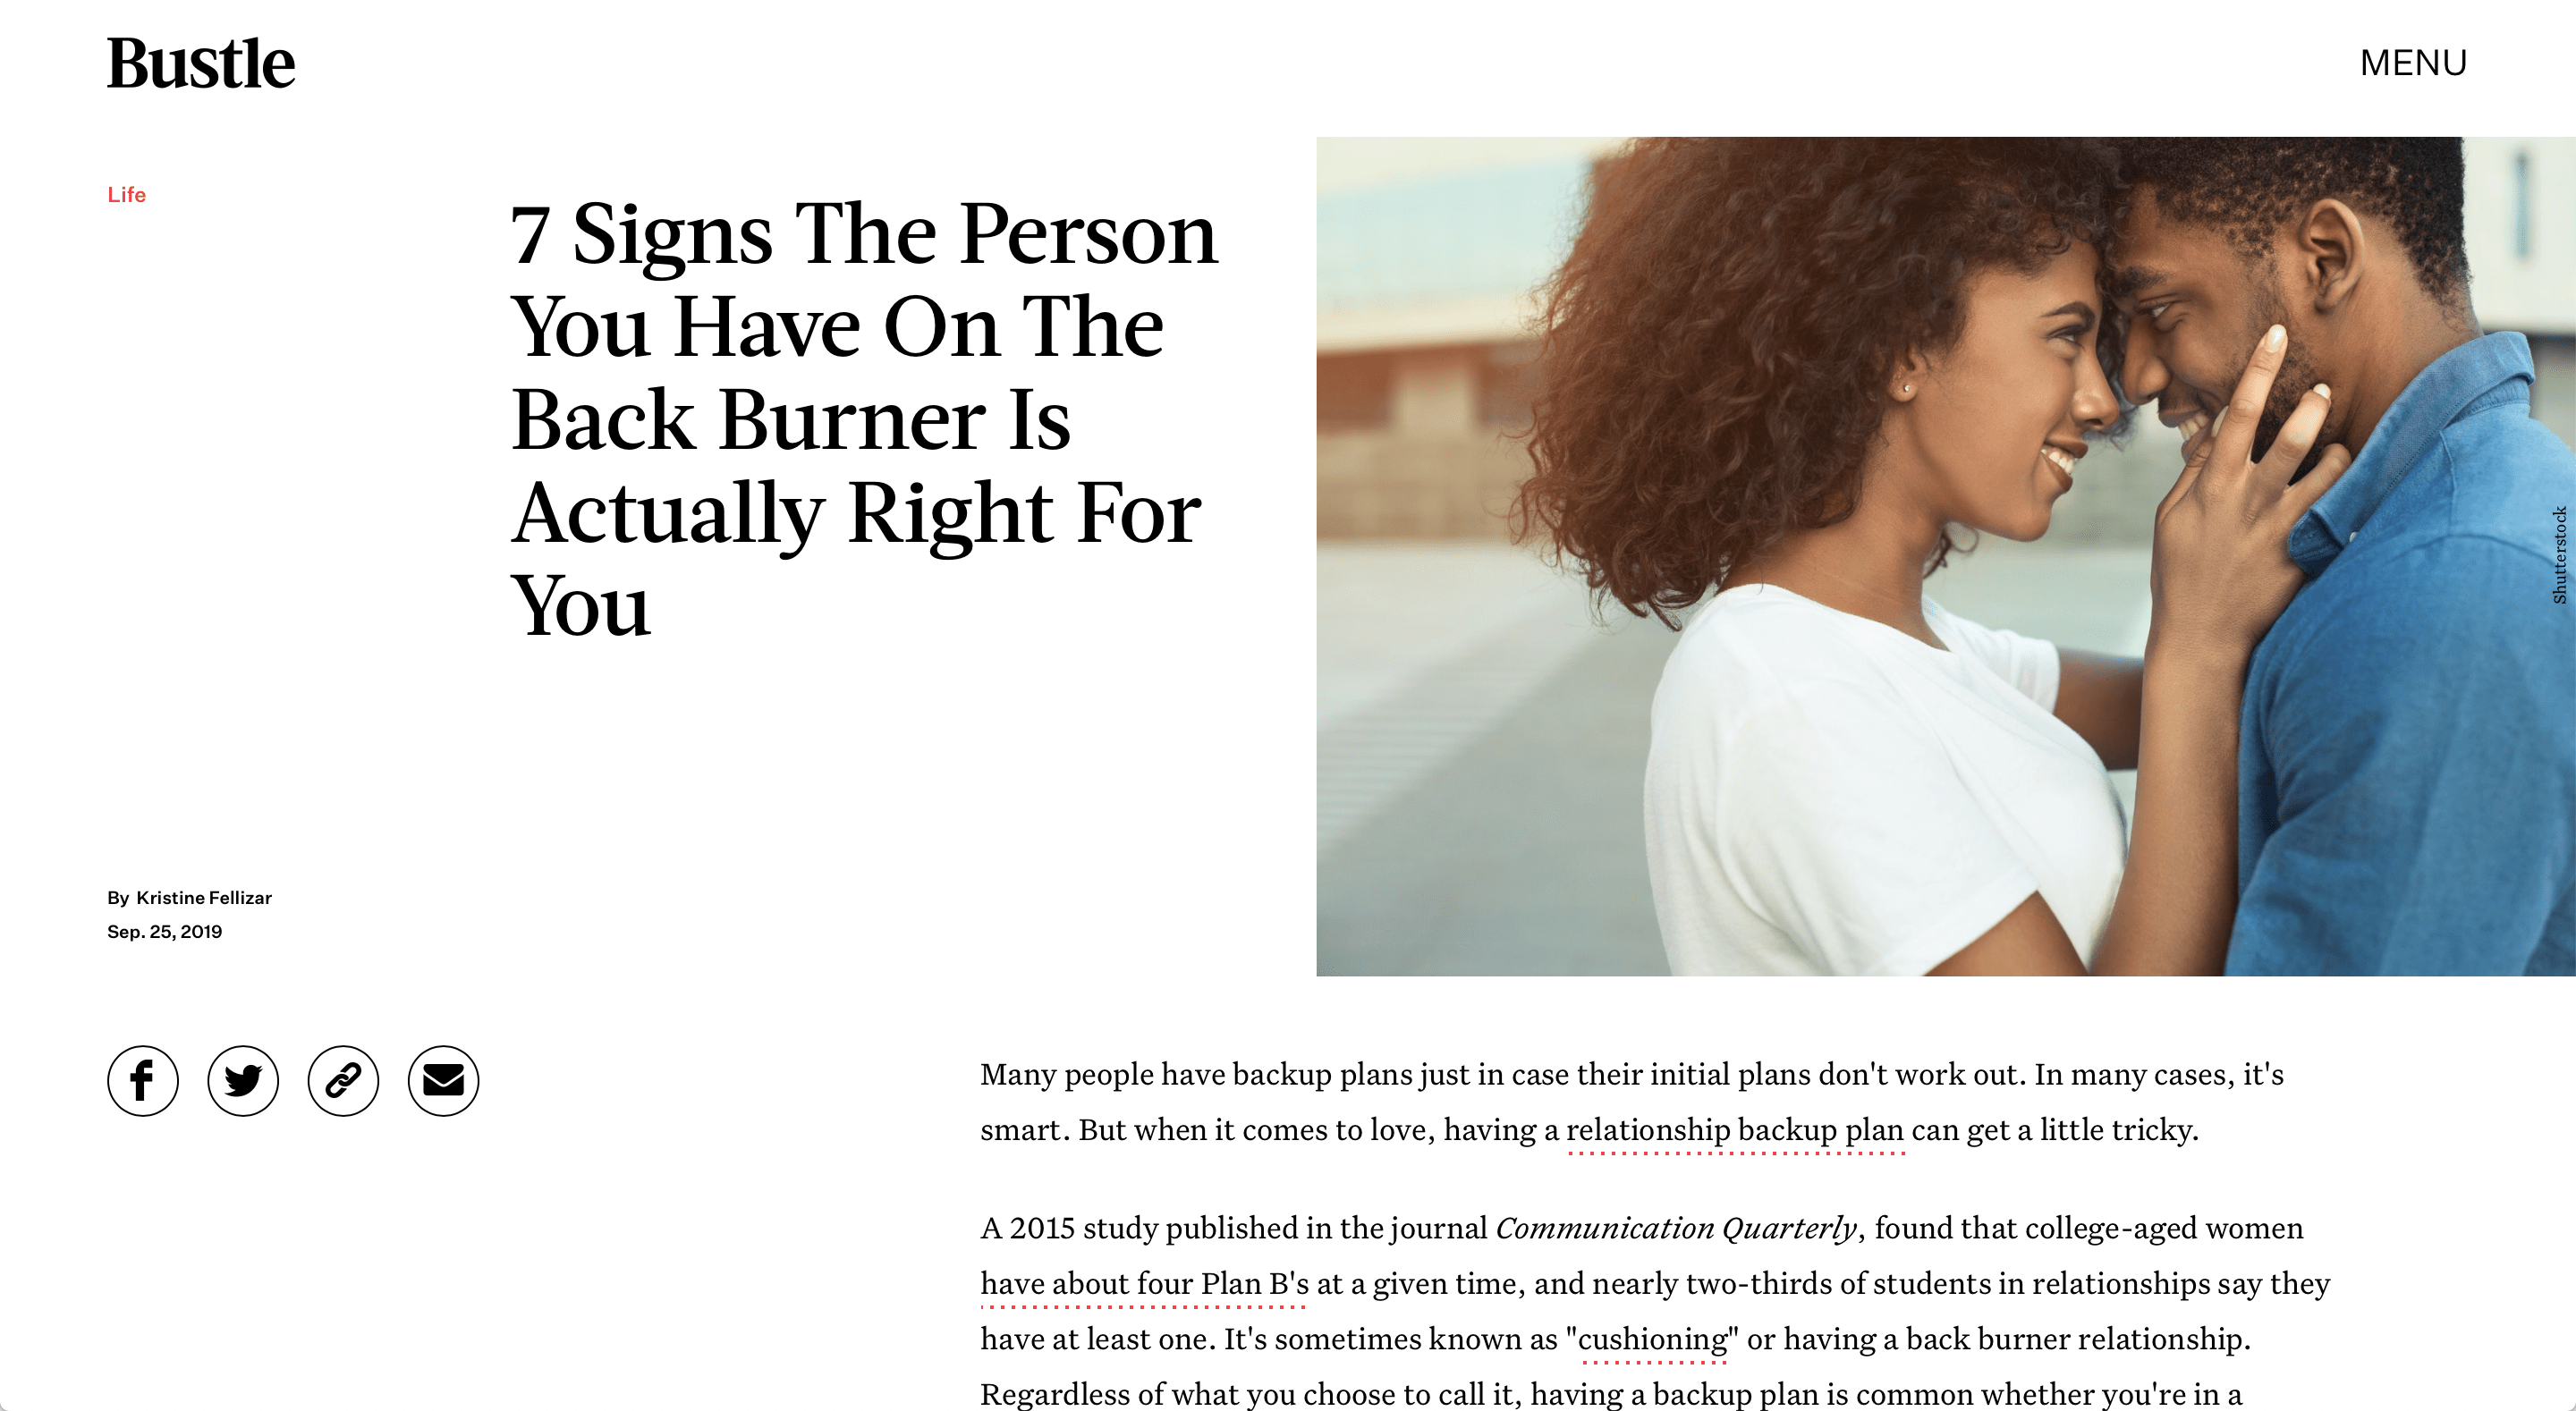 Signs The Person Is Right For You (Bustle) | LPTG Quote